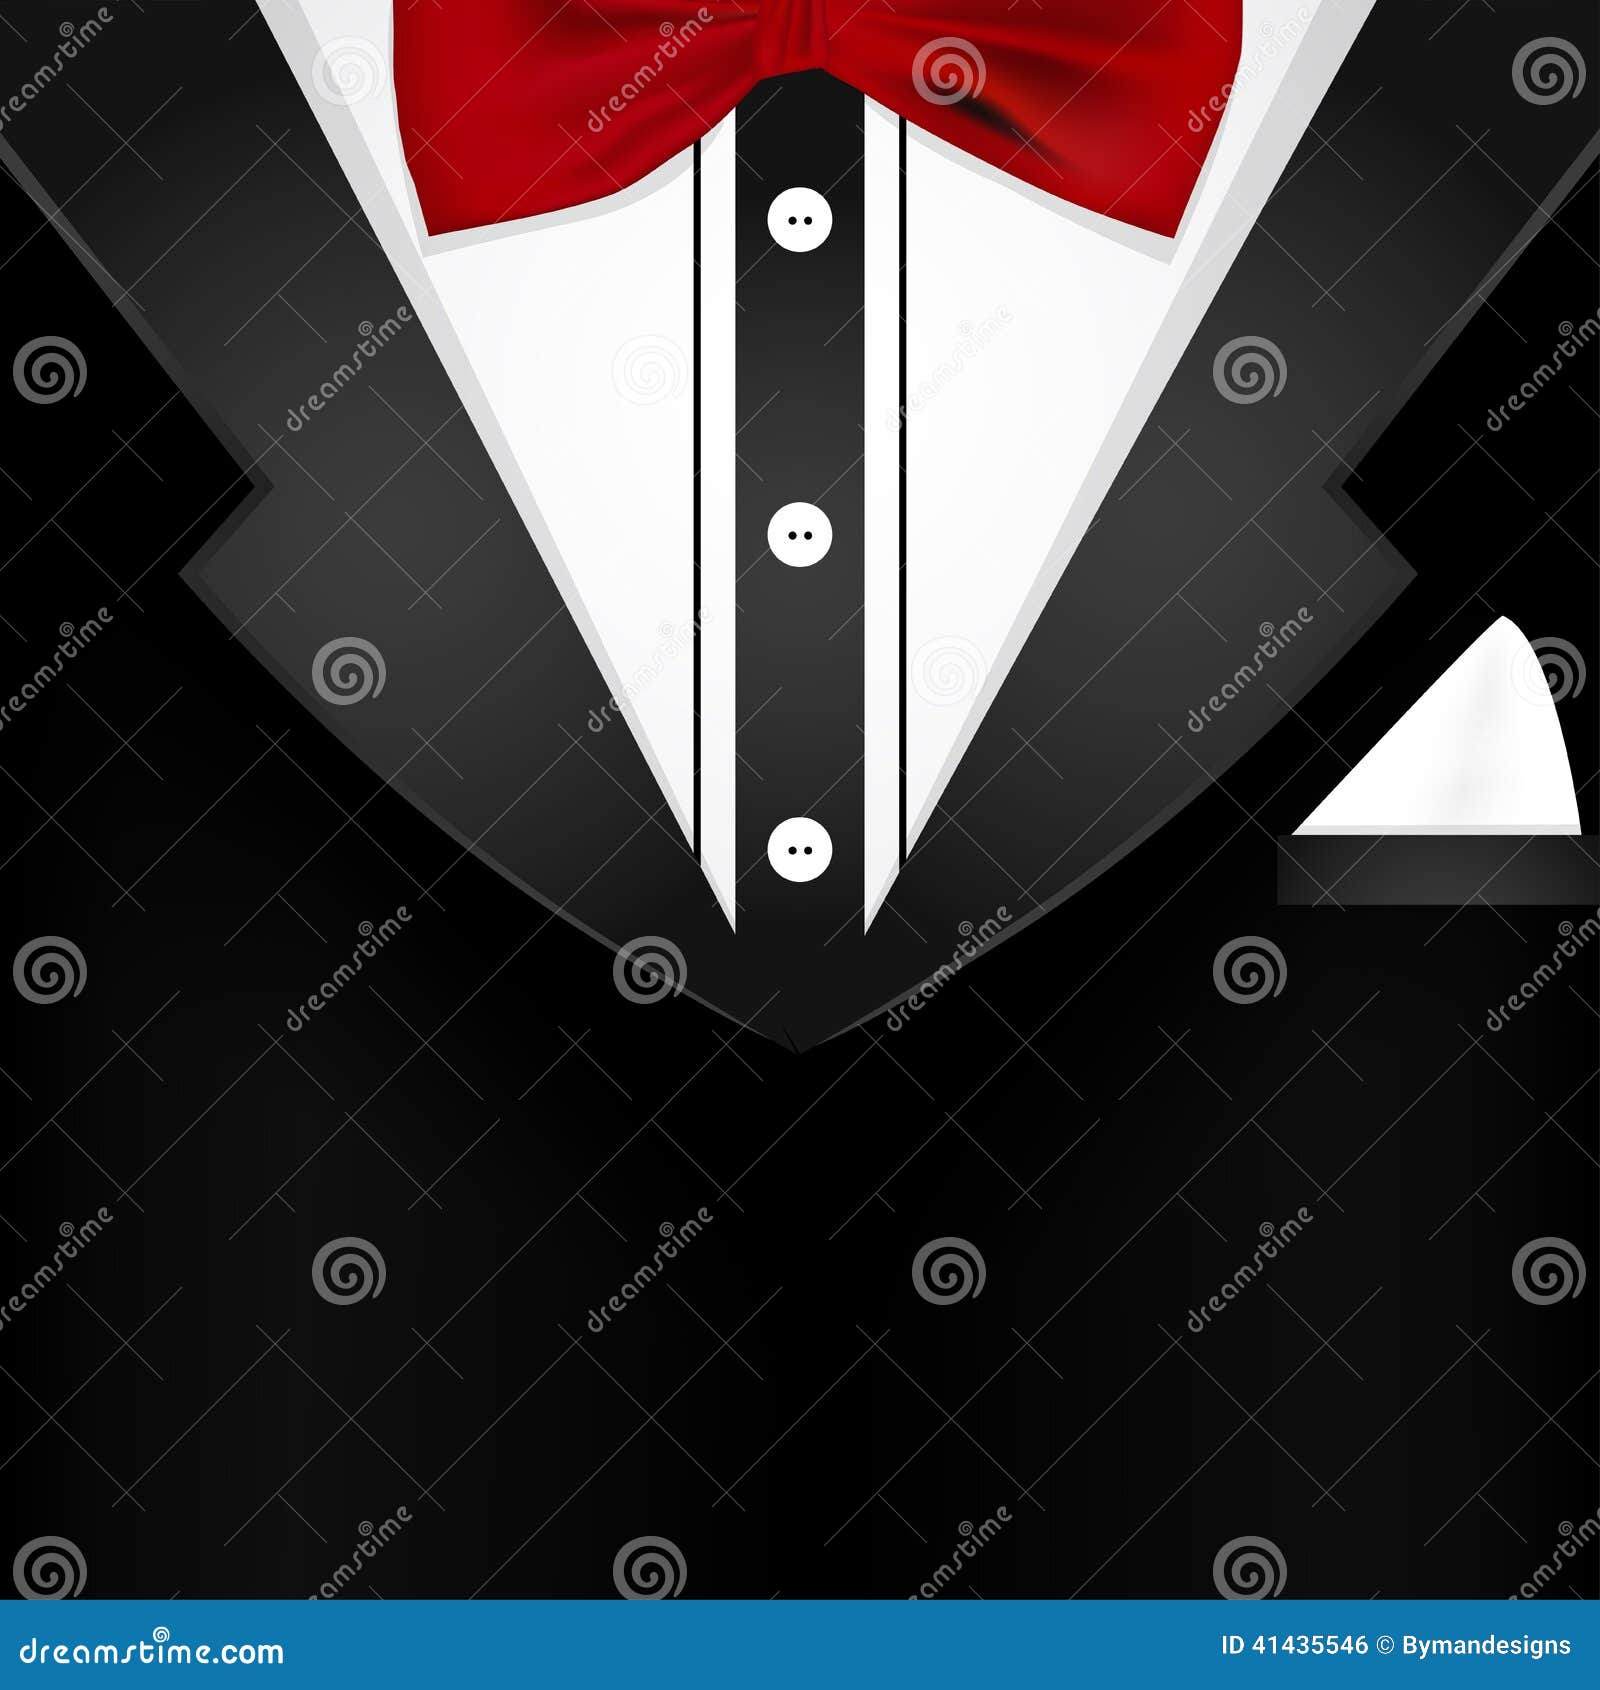 Business Tuxedo Background with a Red Bow Tie and Stock Vector ...